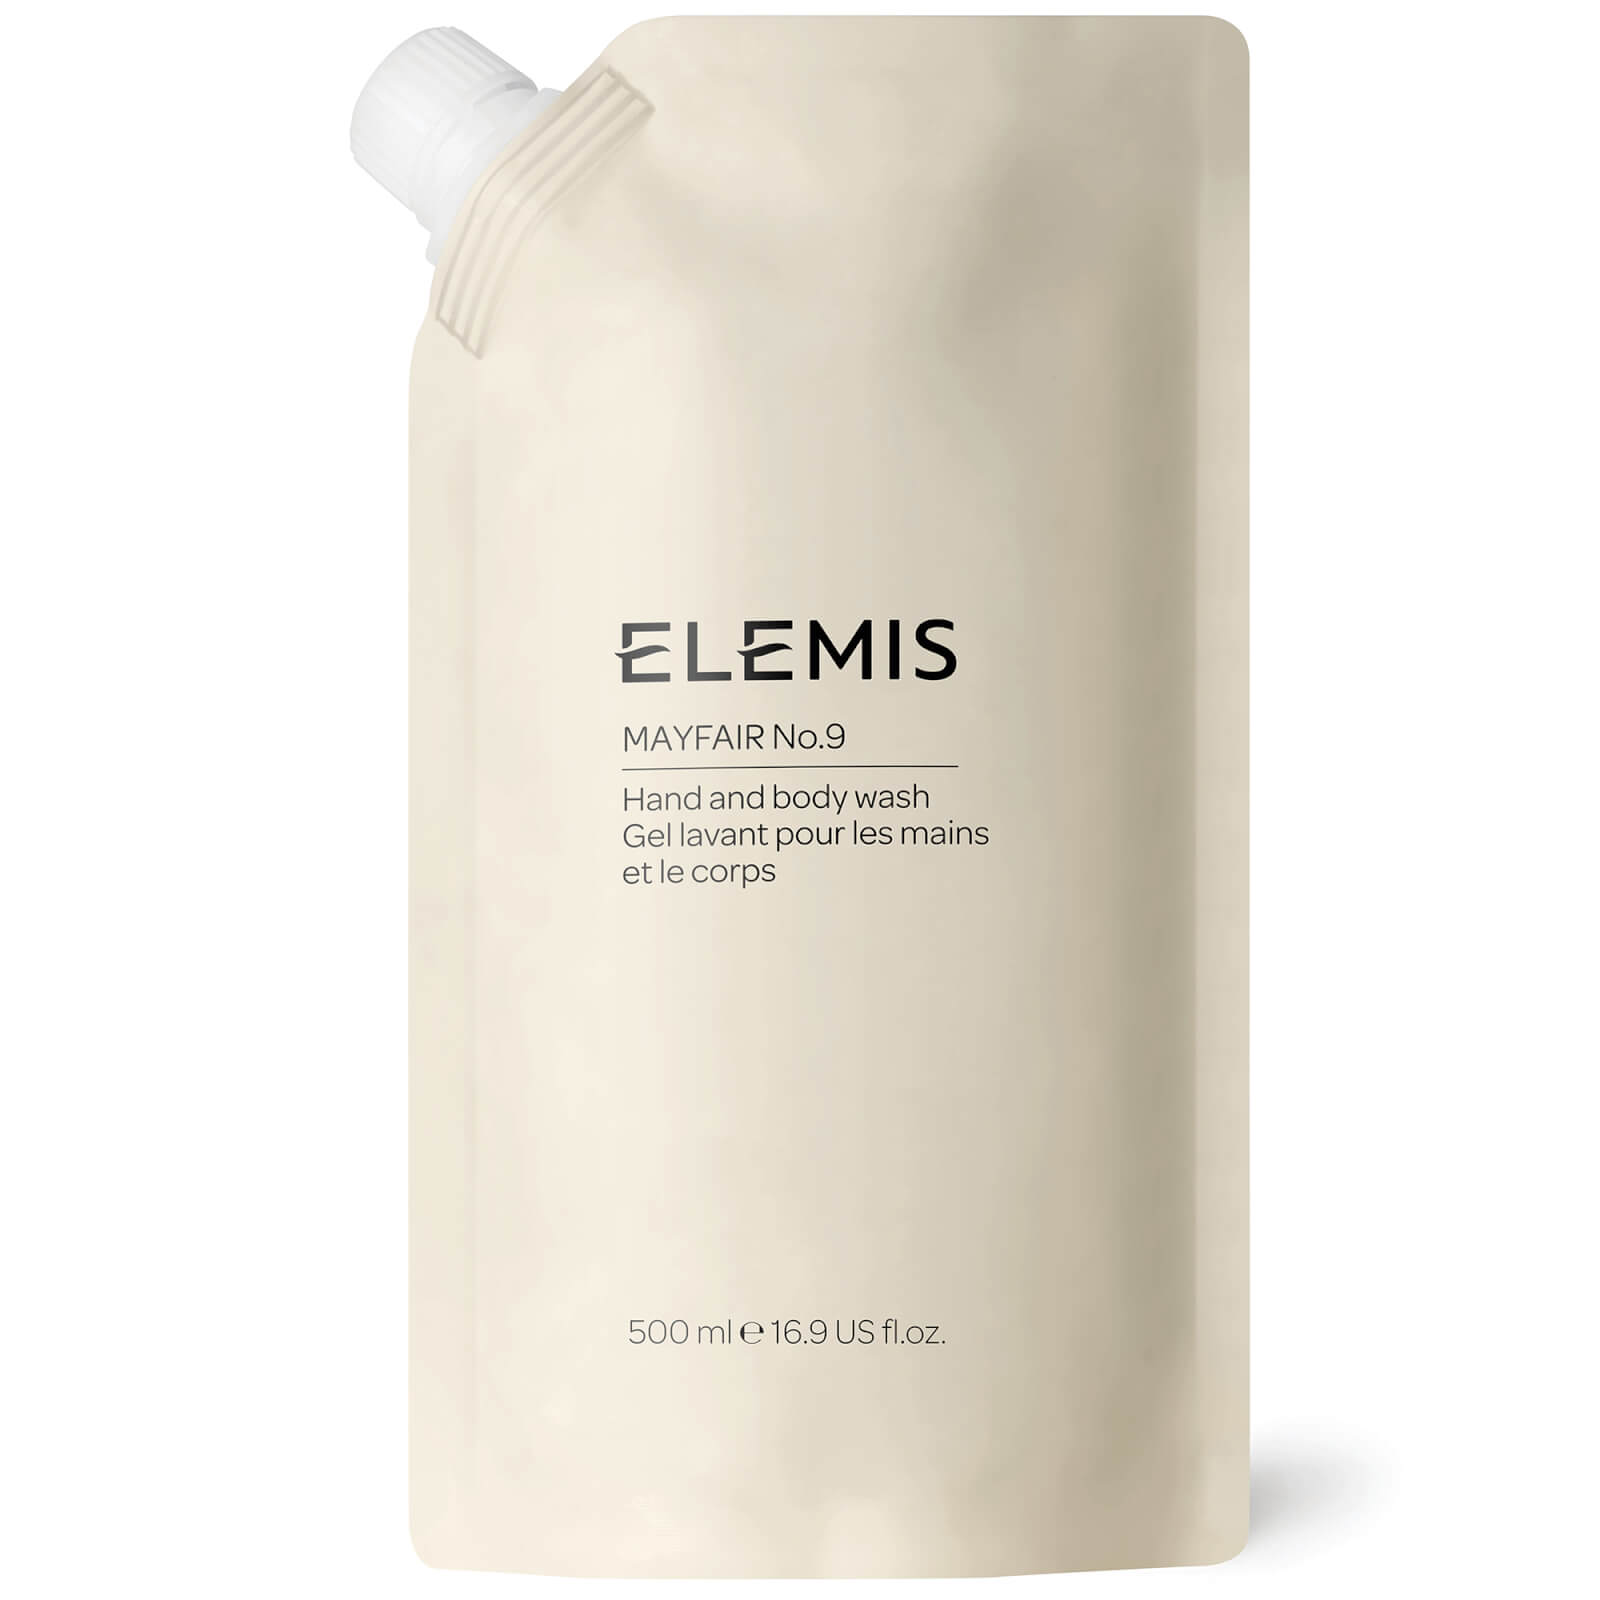 Elemis Mayfair No.9 Hand and Body Wash Refill Pouch 500ml